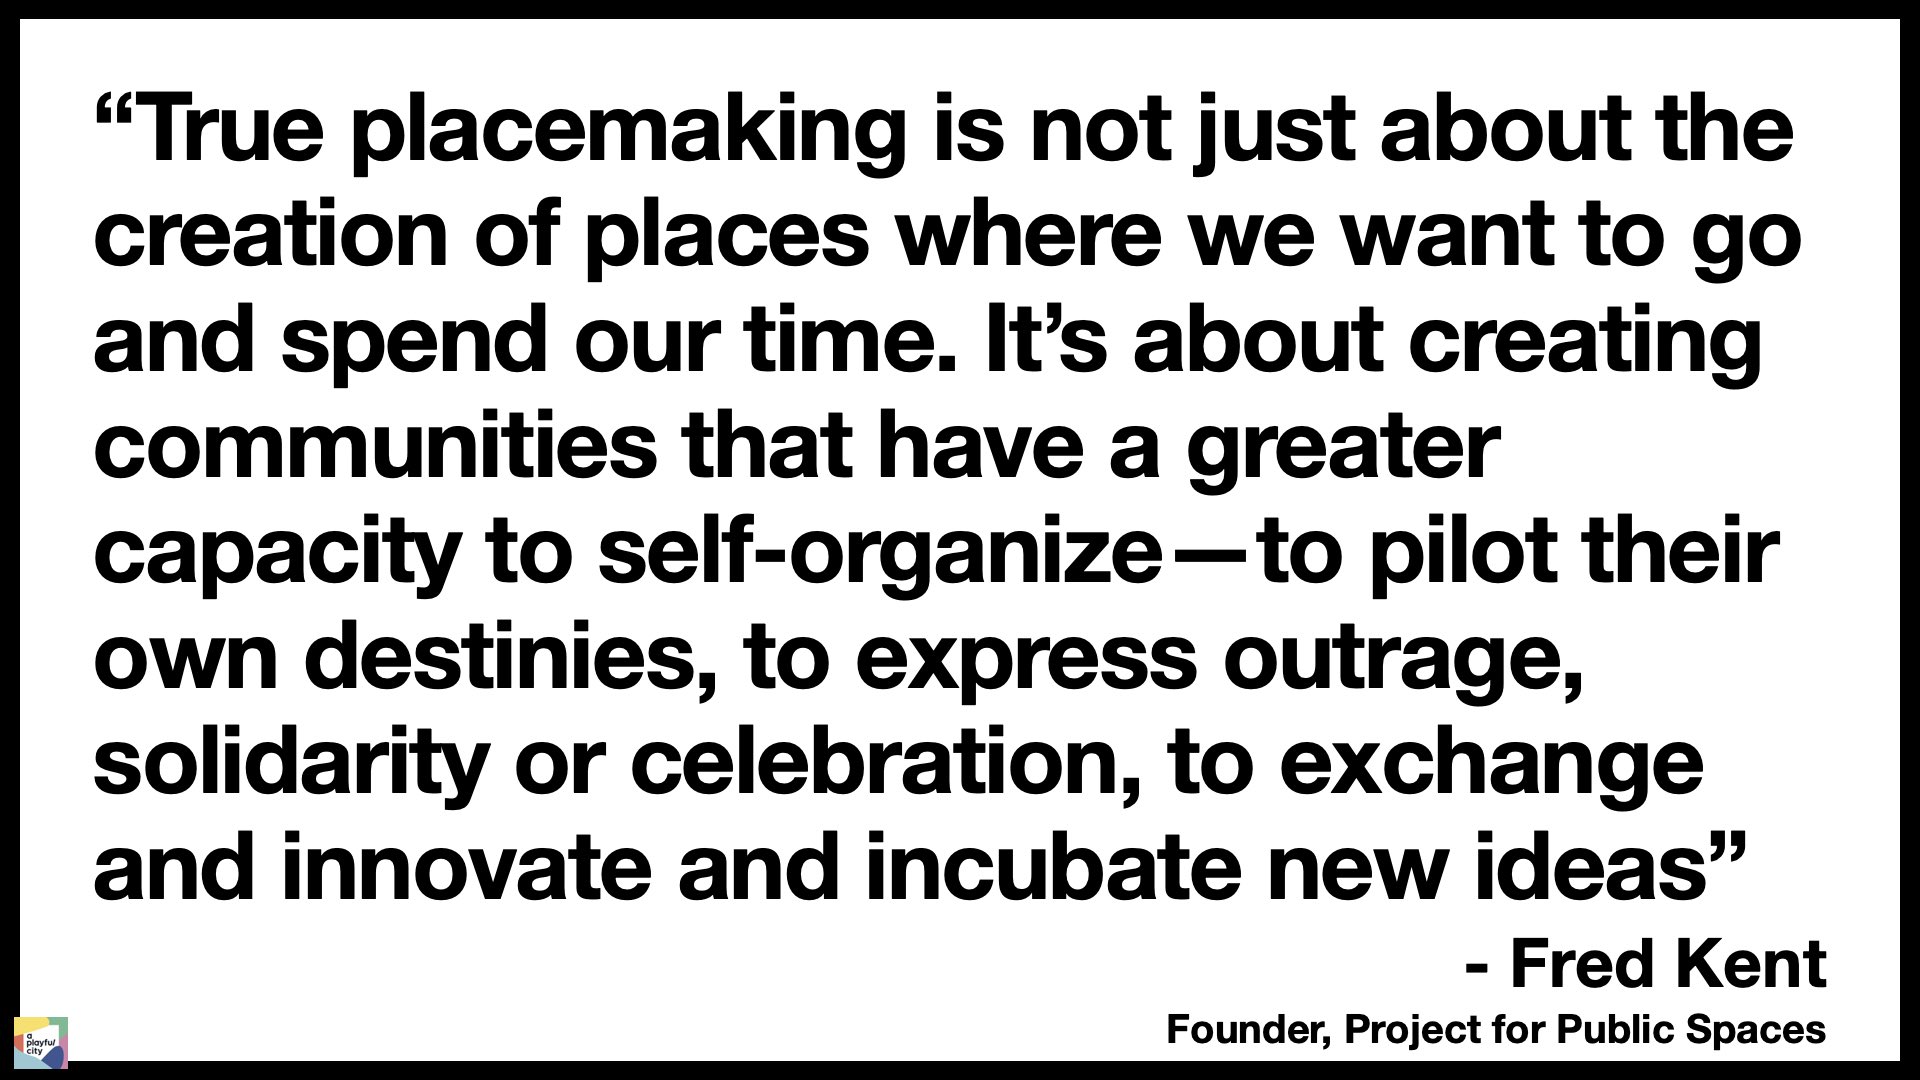 An image showing a quote from Fred Kent. True placemaking is not just about the creation of places where we want to go and spend our time. Its about creating communities that have a greater capacity to self-organize - to pilot their own destinies, to express outrage, solidarity or celebration, to exchange and innovate and incubate new ideas.